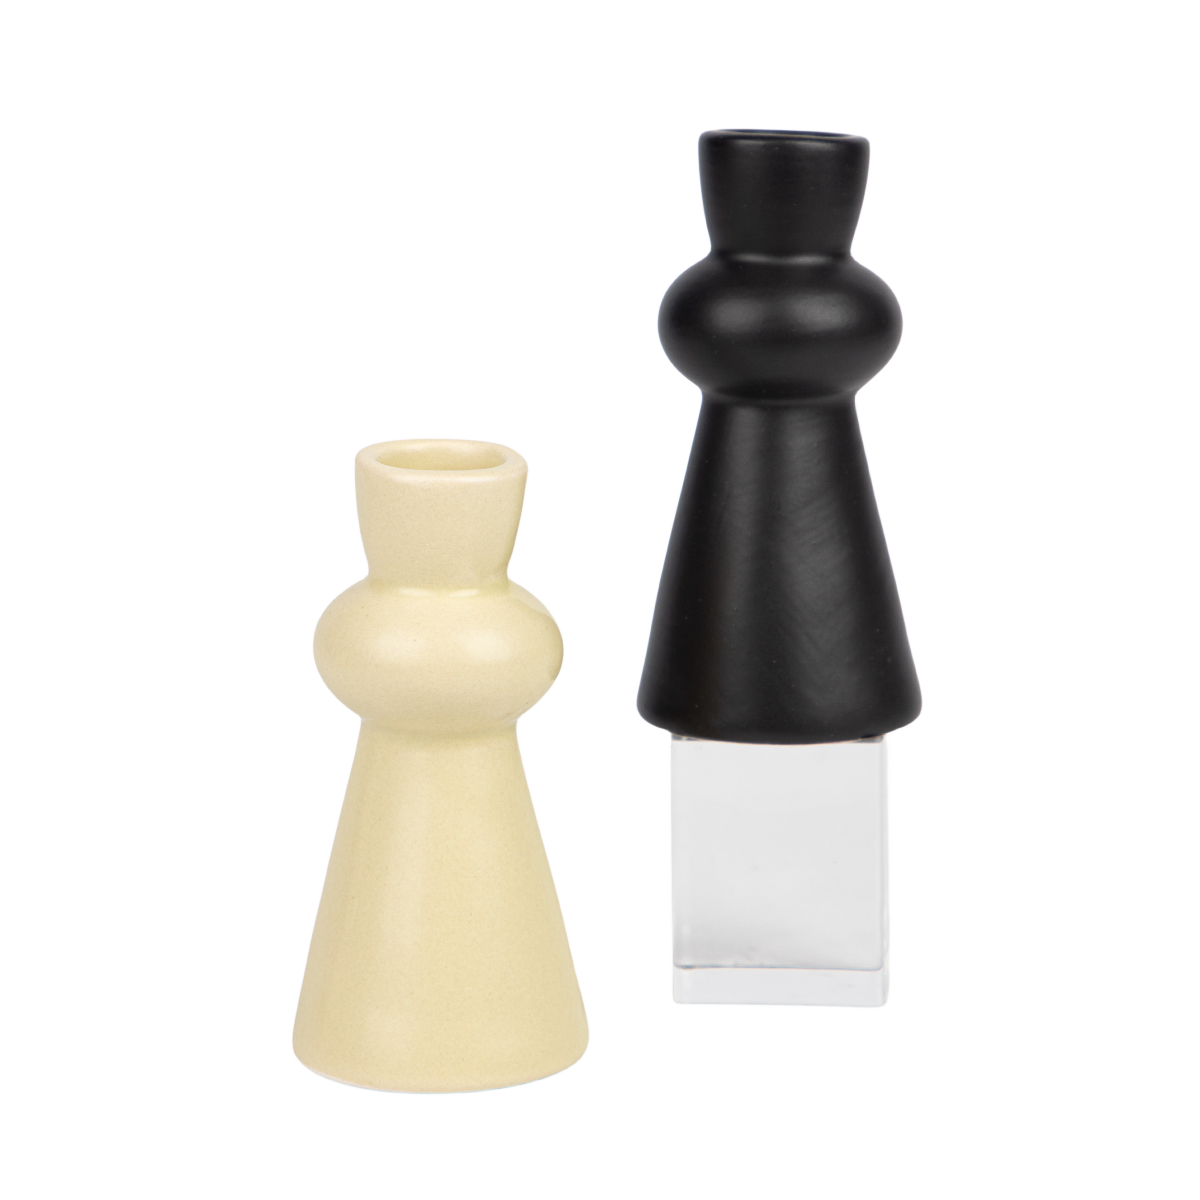 qinge Candlestick Two Ceramic Candle Holders That Double as Chess Pieces